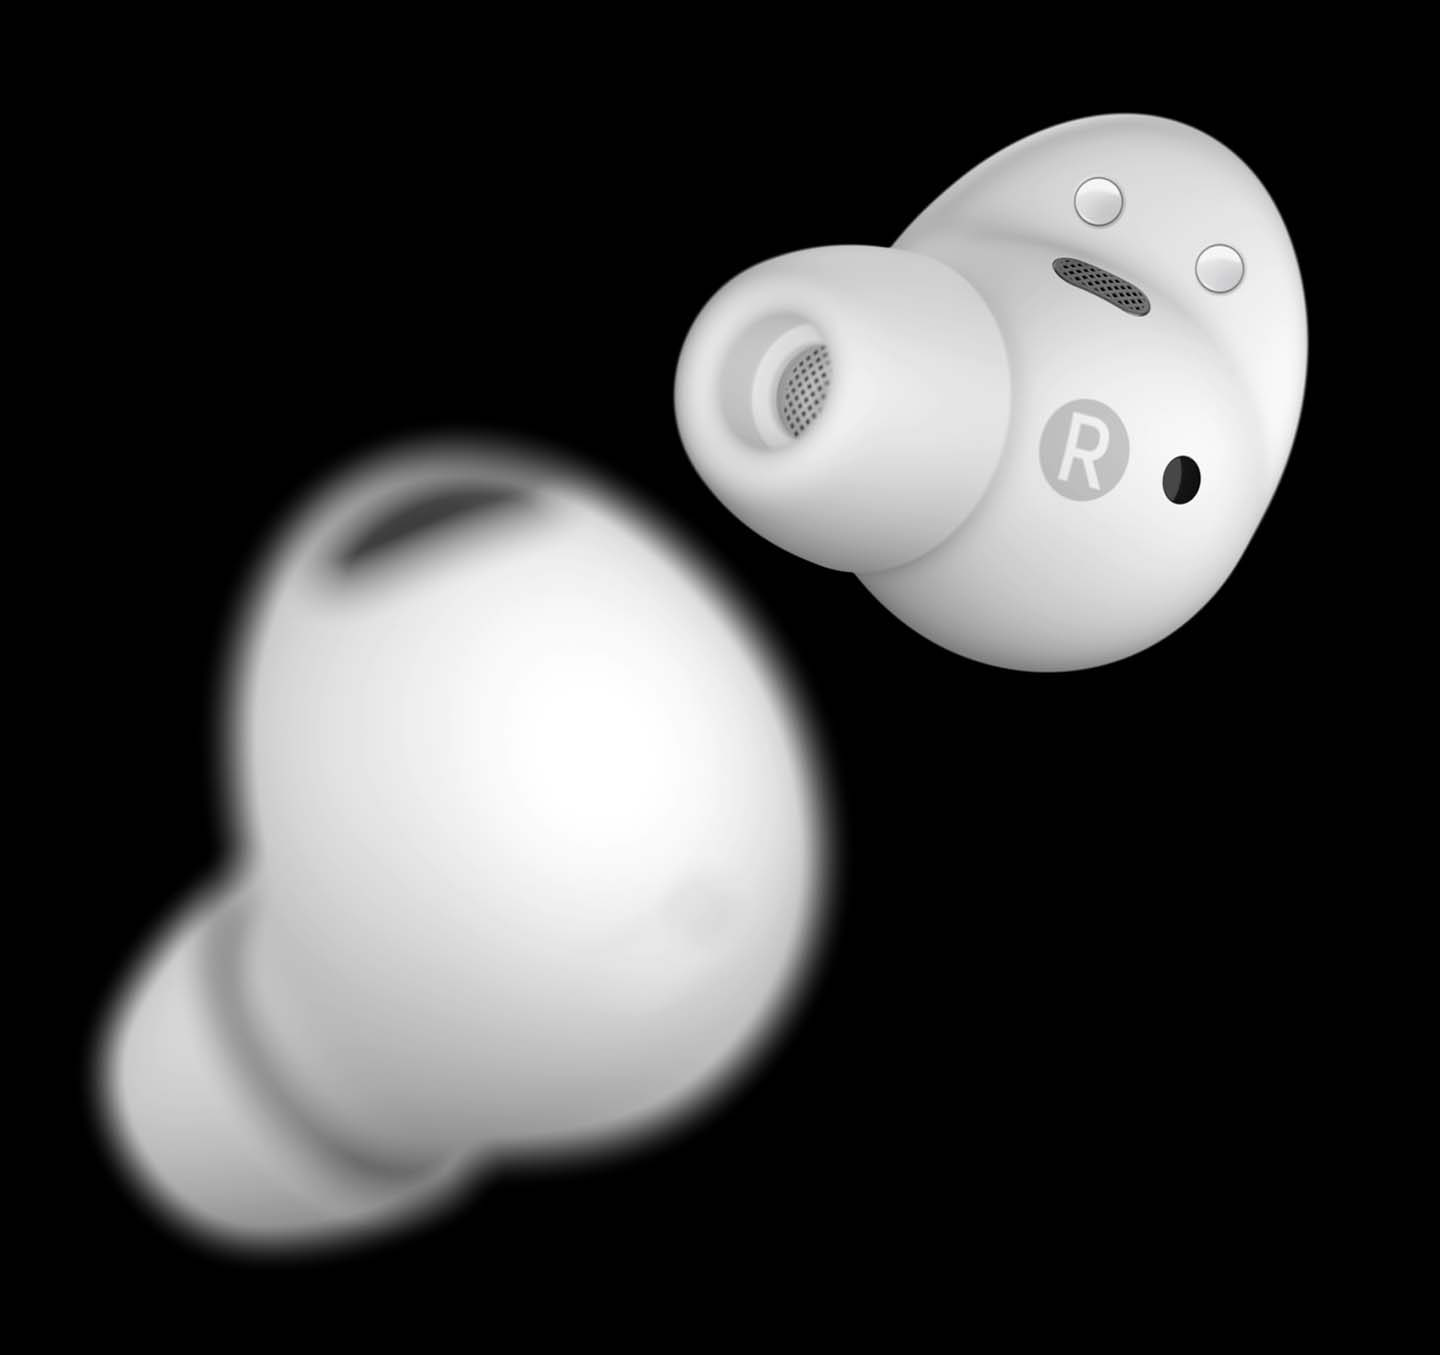 Two White Galaxy Buds2 Pro earbuds placed one in front of the other using a short depth of field to show the front bud clearly while the back bud is blurry.